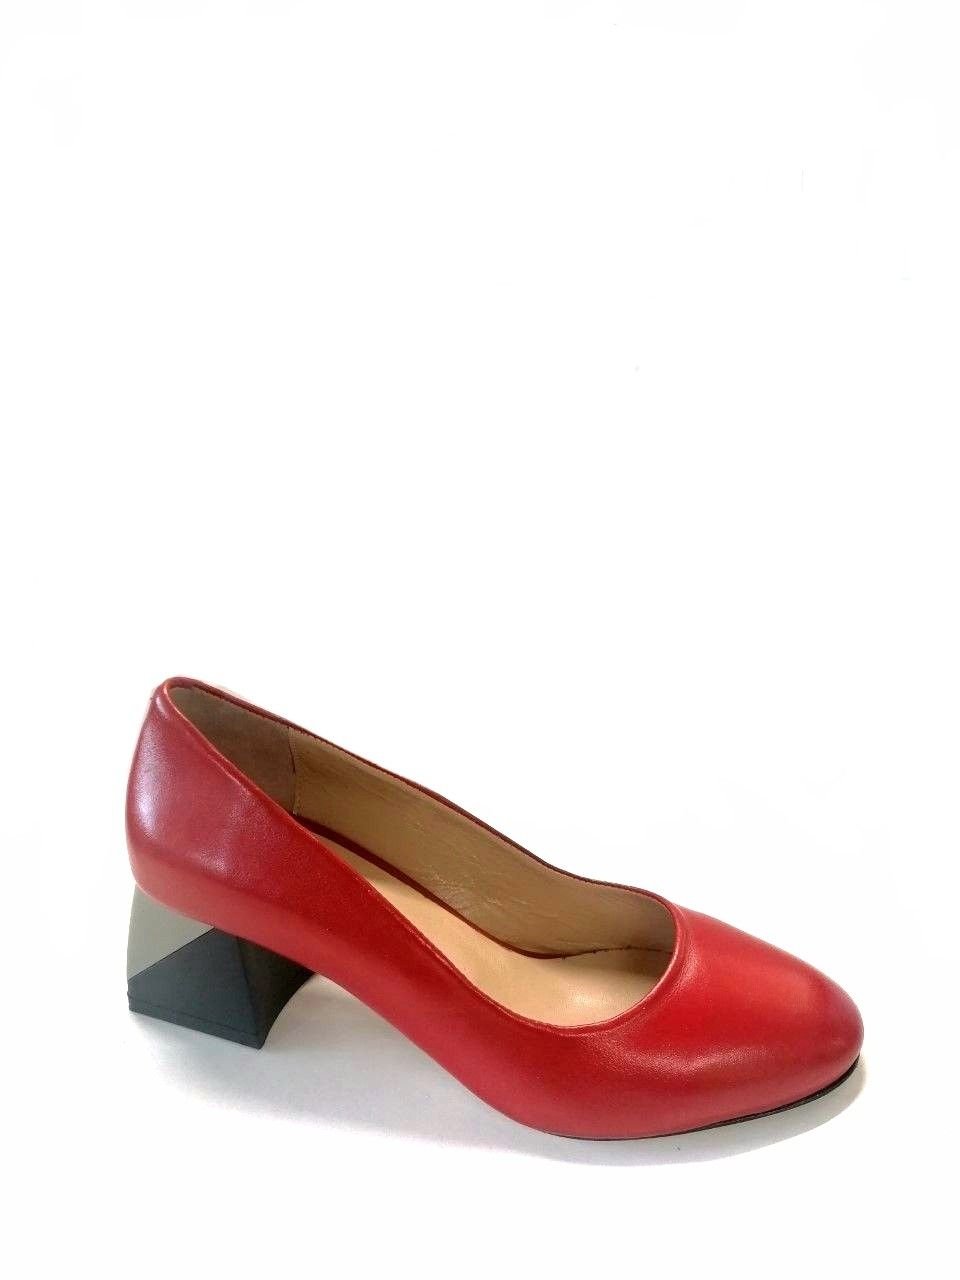 full leather red classic shoes with imported heel